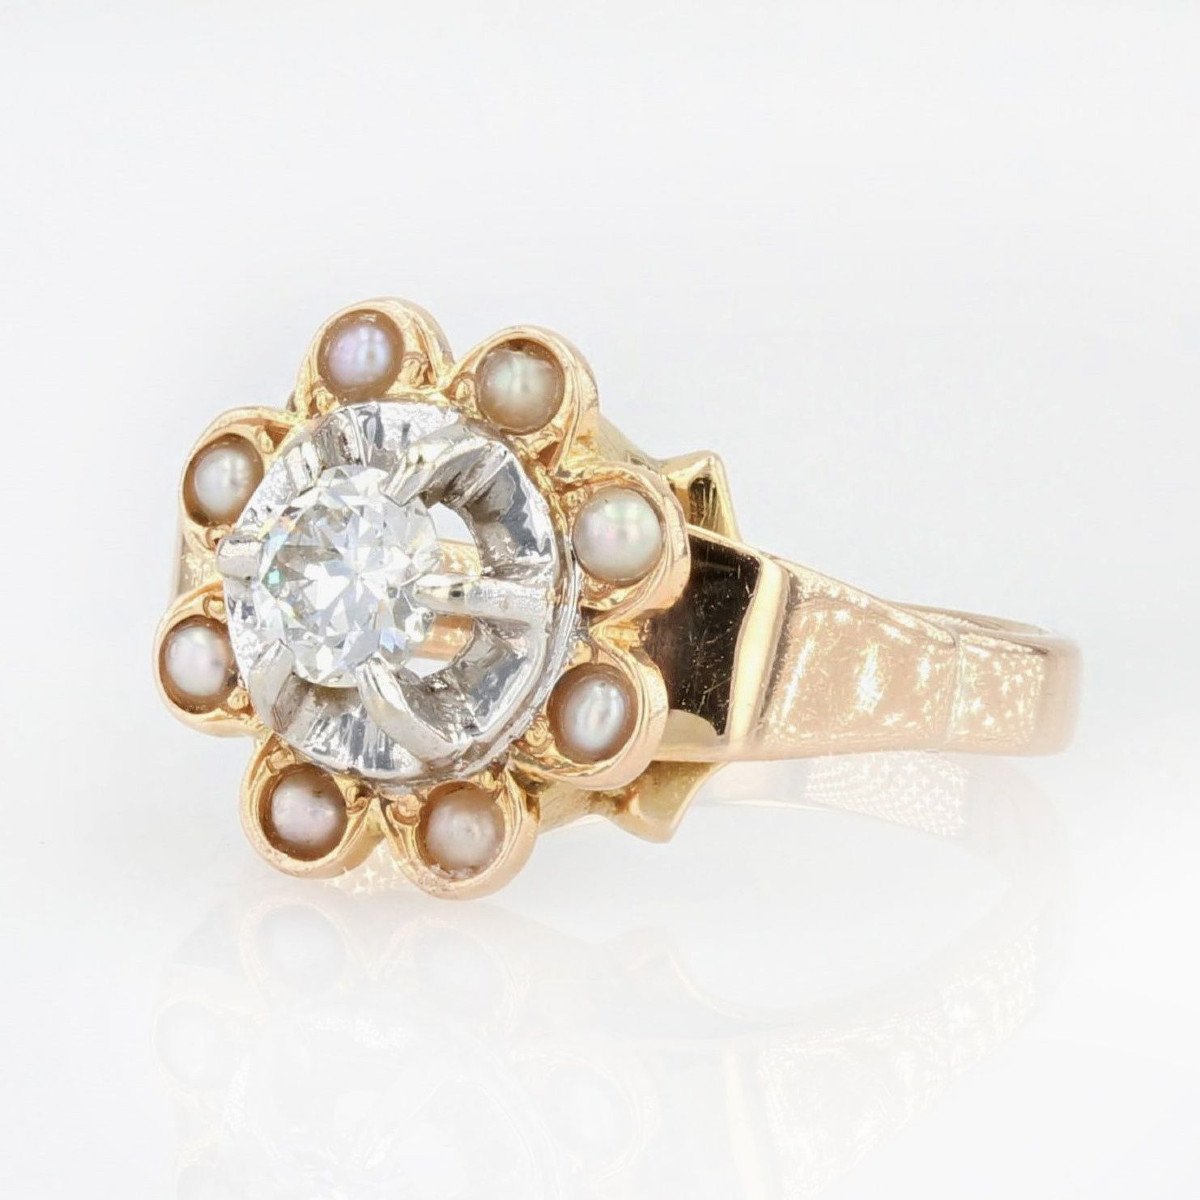 Old Diamond Ring Surrounded By Pearls-photo-2